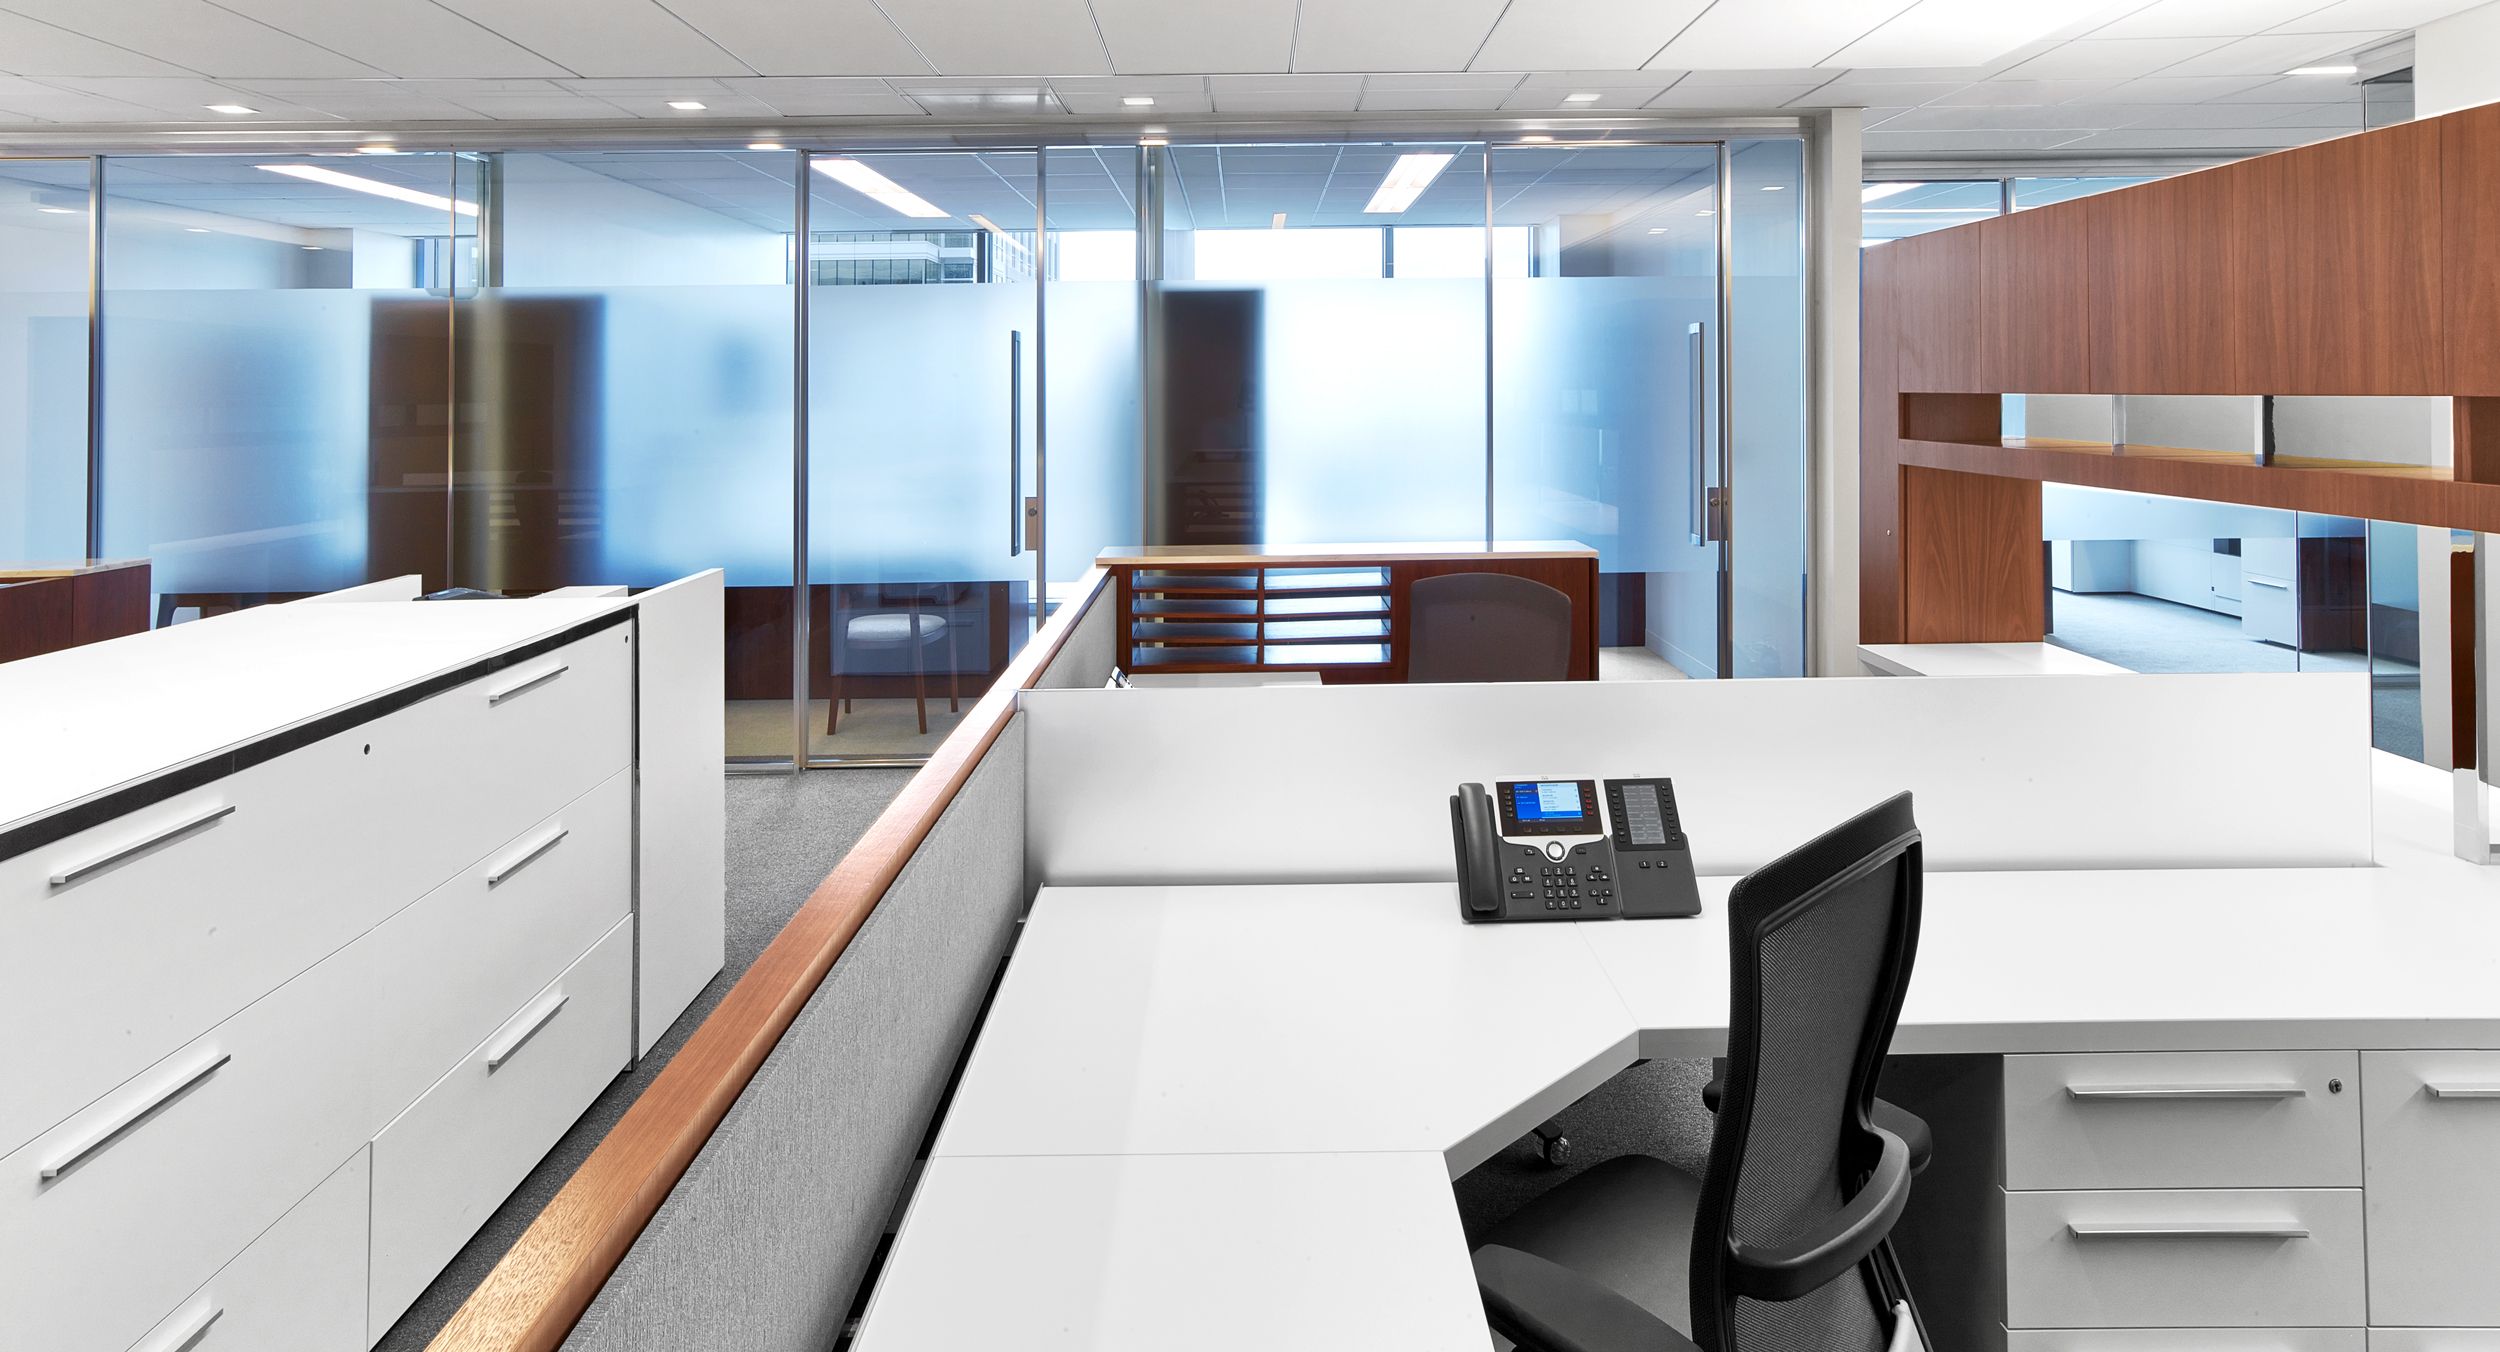 Workstations feature a full range of materials with walnut veneers, laminate, chrome, fabric, etched glass, and stone.